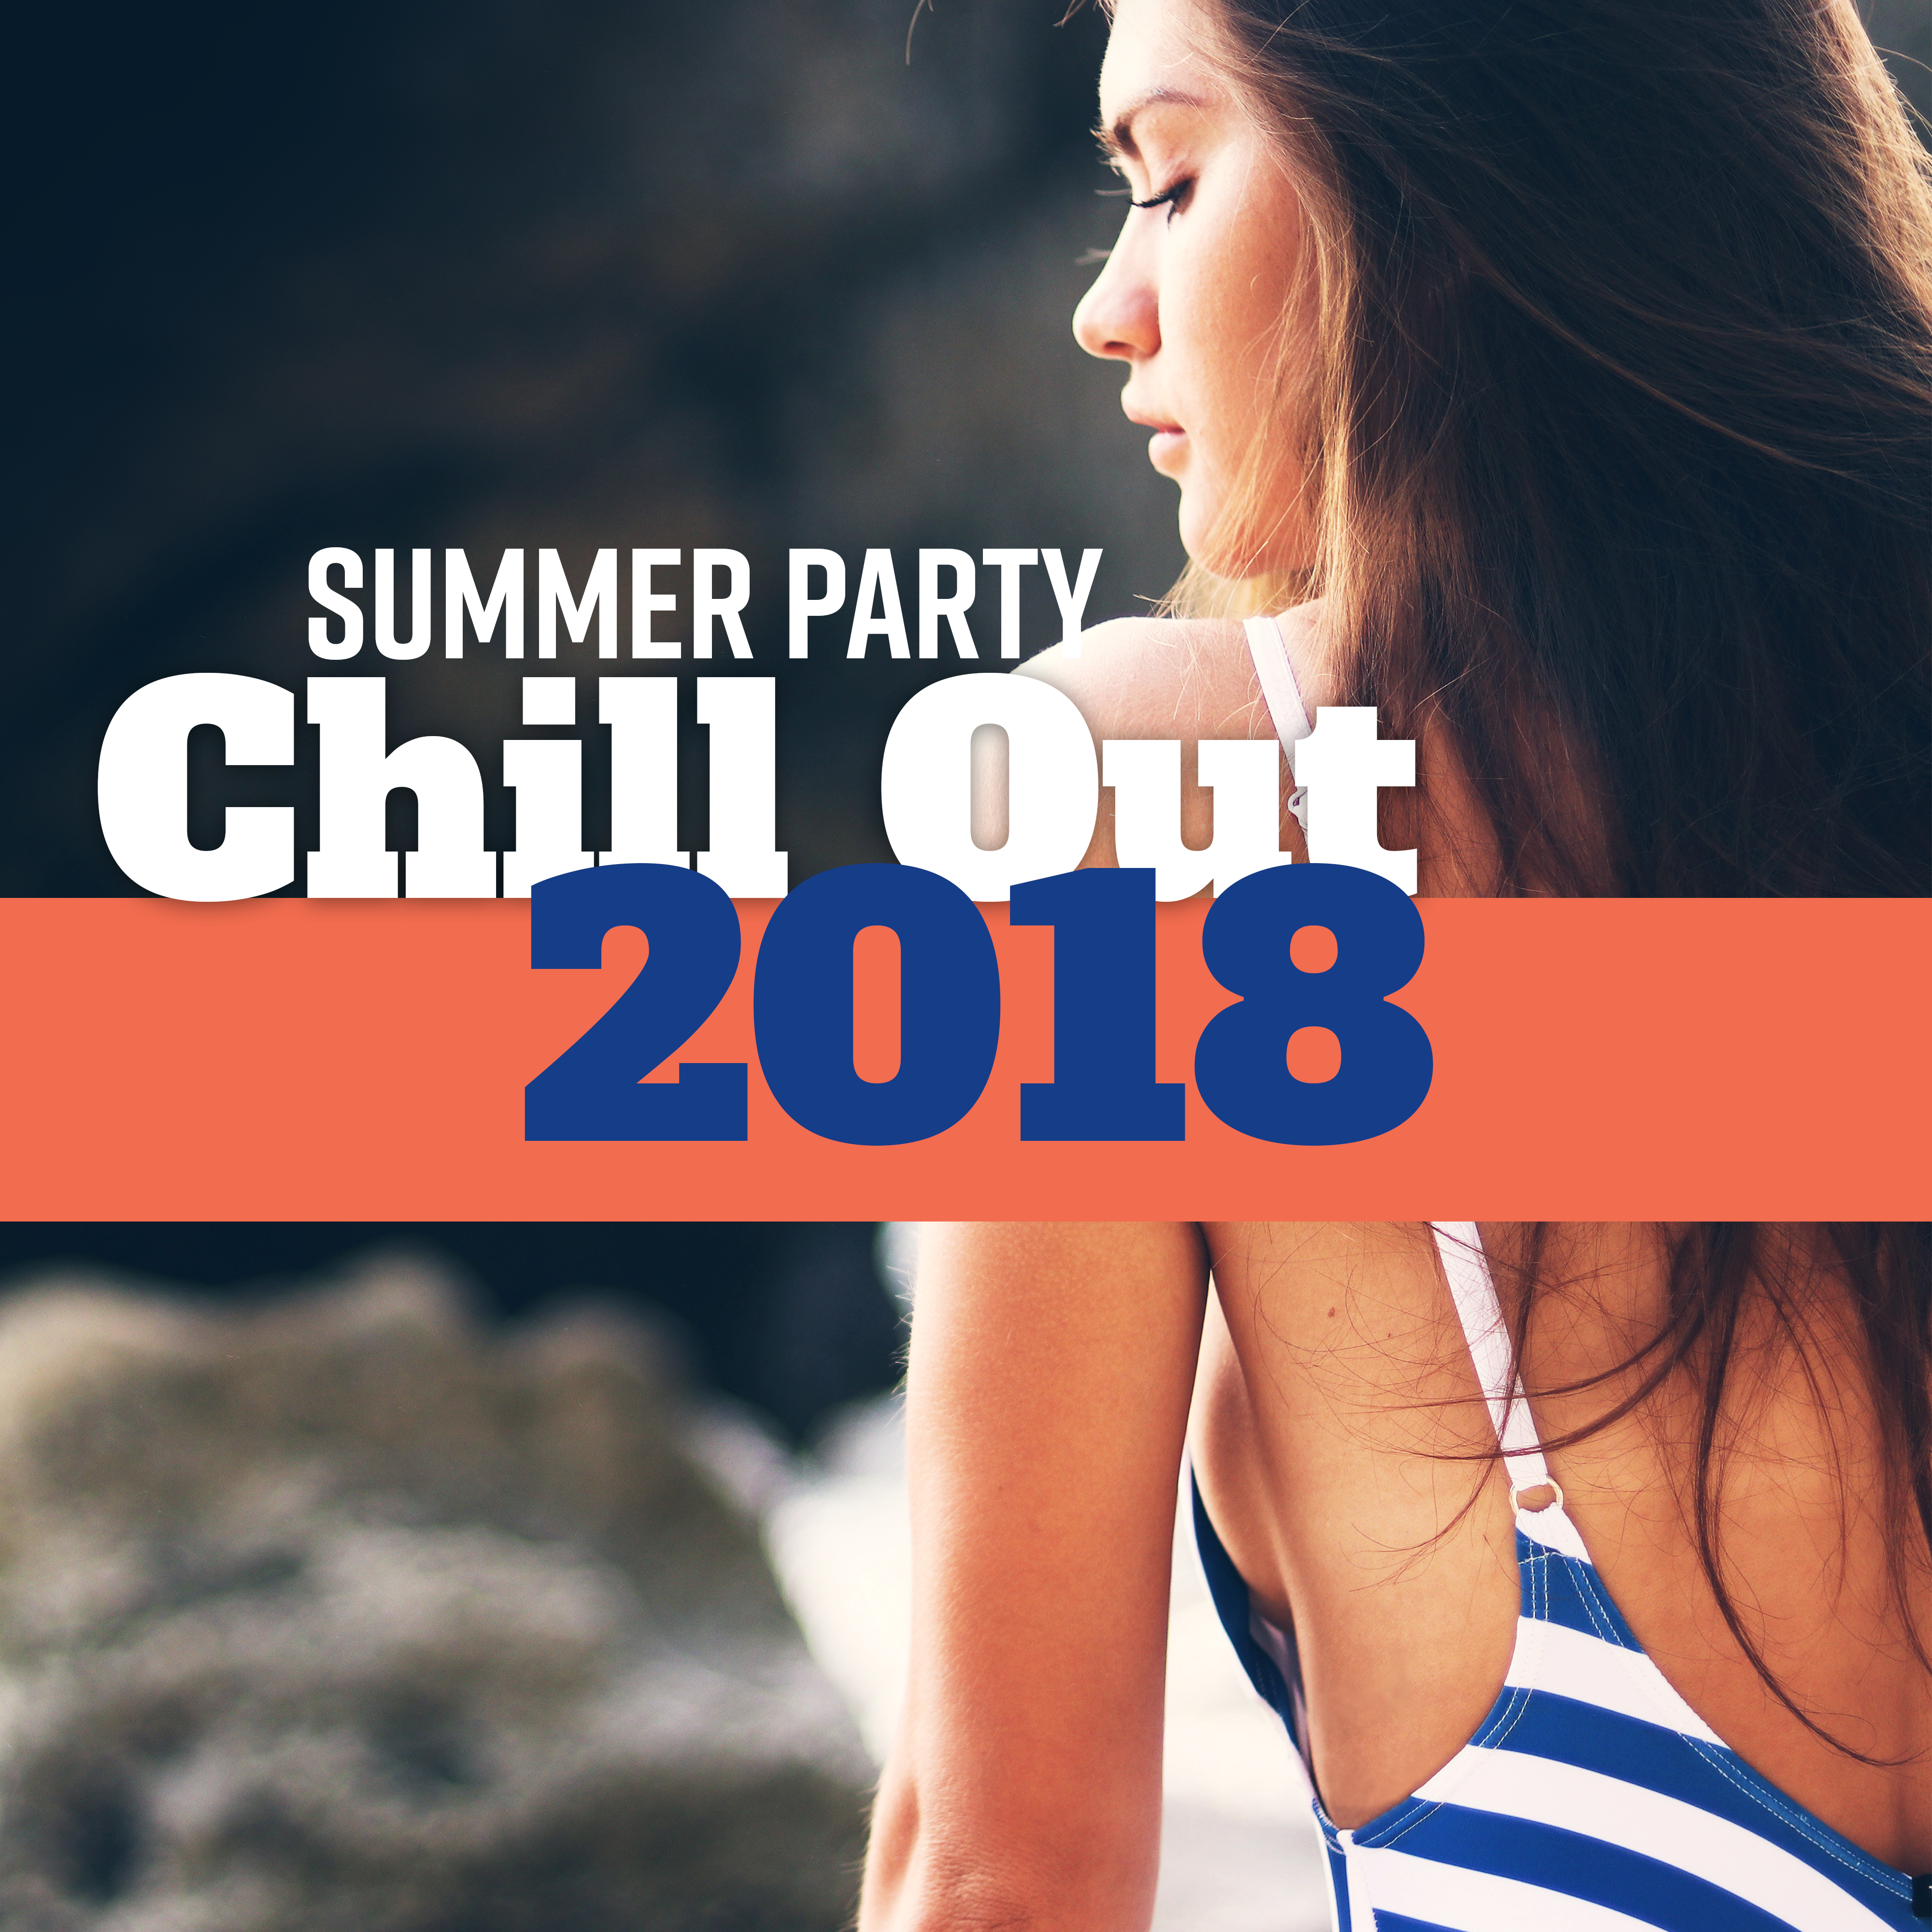 Summer Party: Chill Out 2018